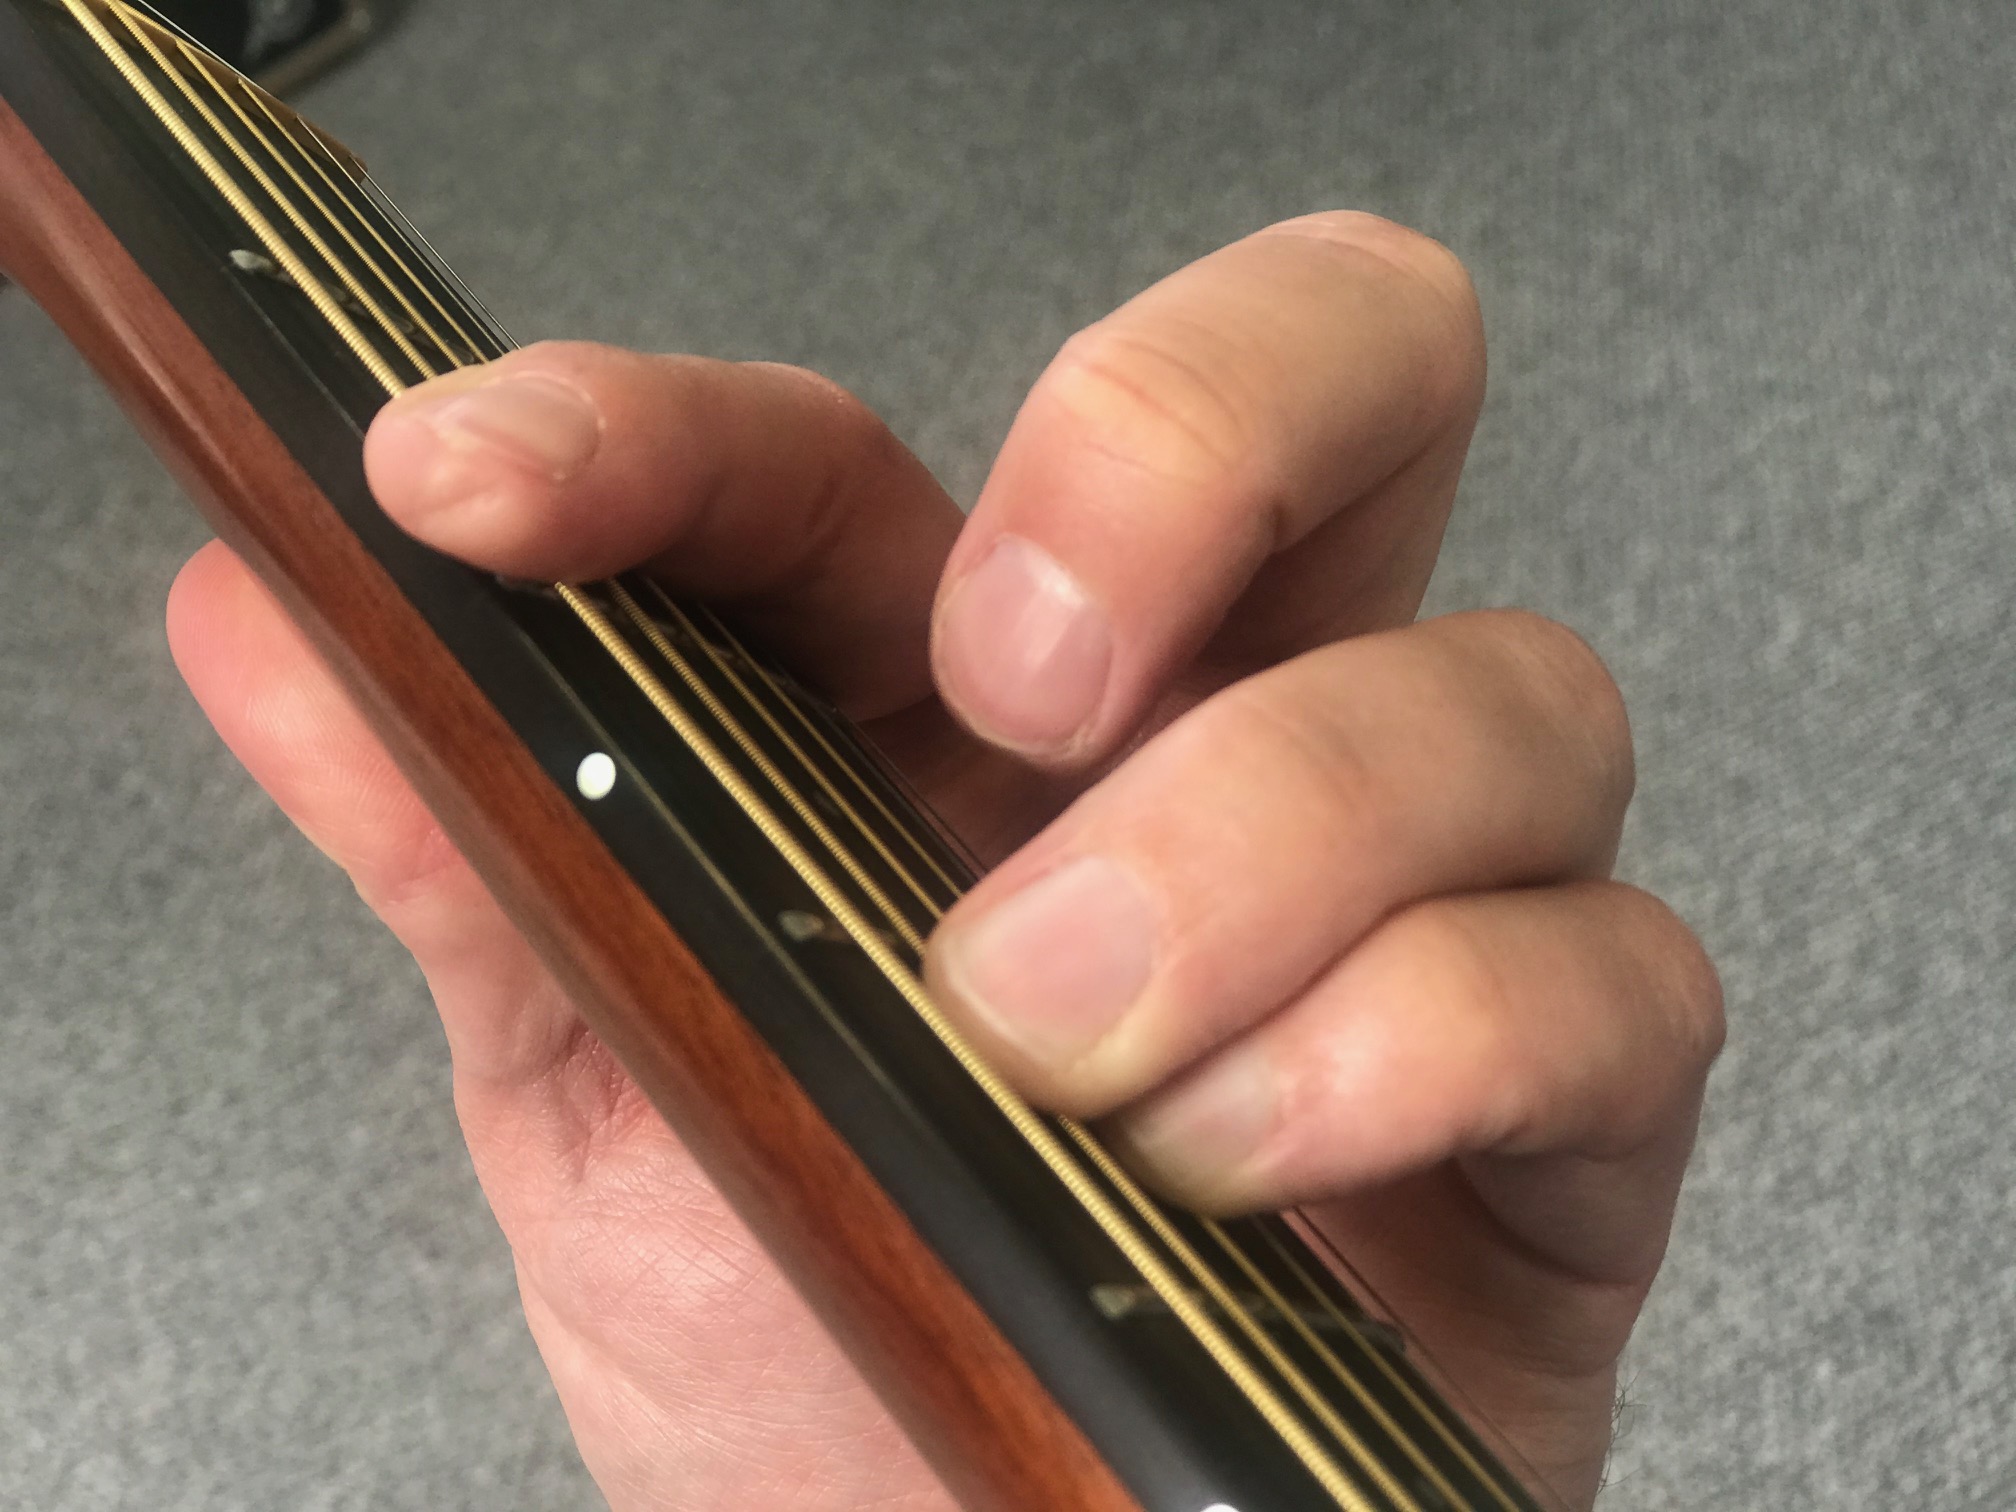 How To Play The Fm Chord On Guitar (F Sharp Minor) With